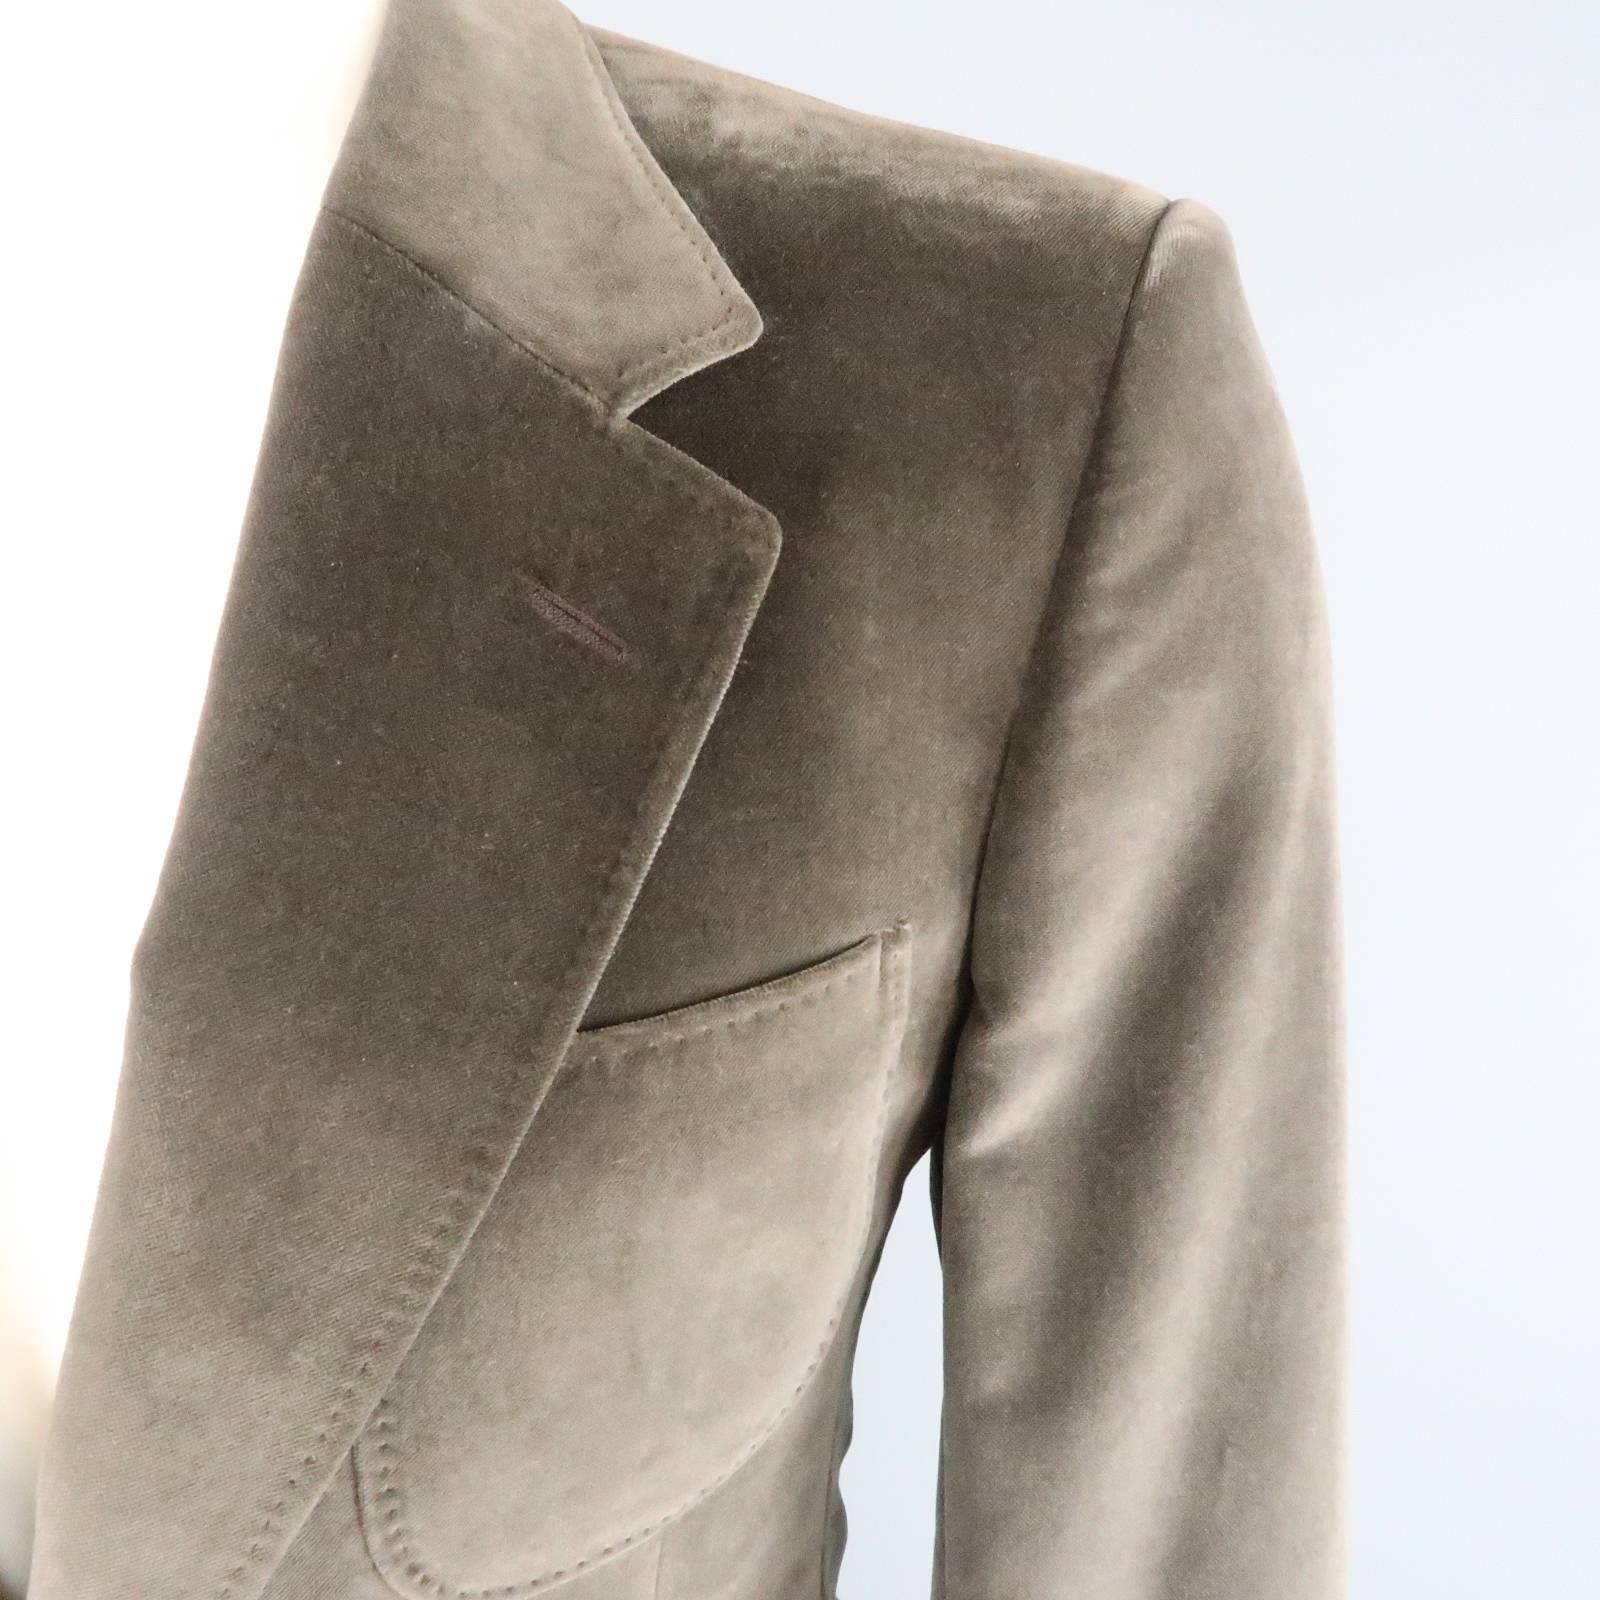 YVES SAINT LAURENT by TOM FORD sport coat comes in dark taupe velvet and features a notch lapel, triple patch pockets, unique tab button cuffs, and top stitching throughout. Snag on lapel. As-Is.
 
Good Pre-Owned Condition.
Marked: 44 R
